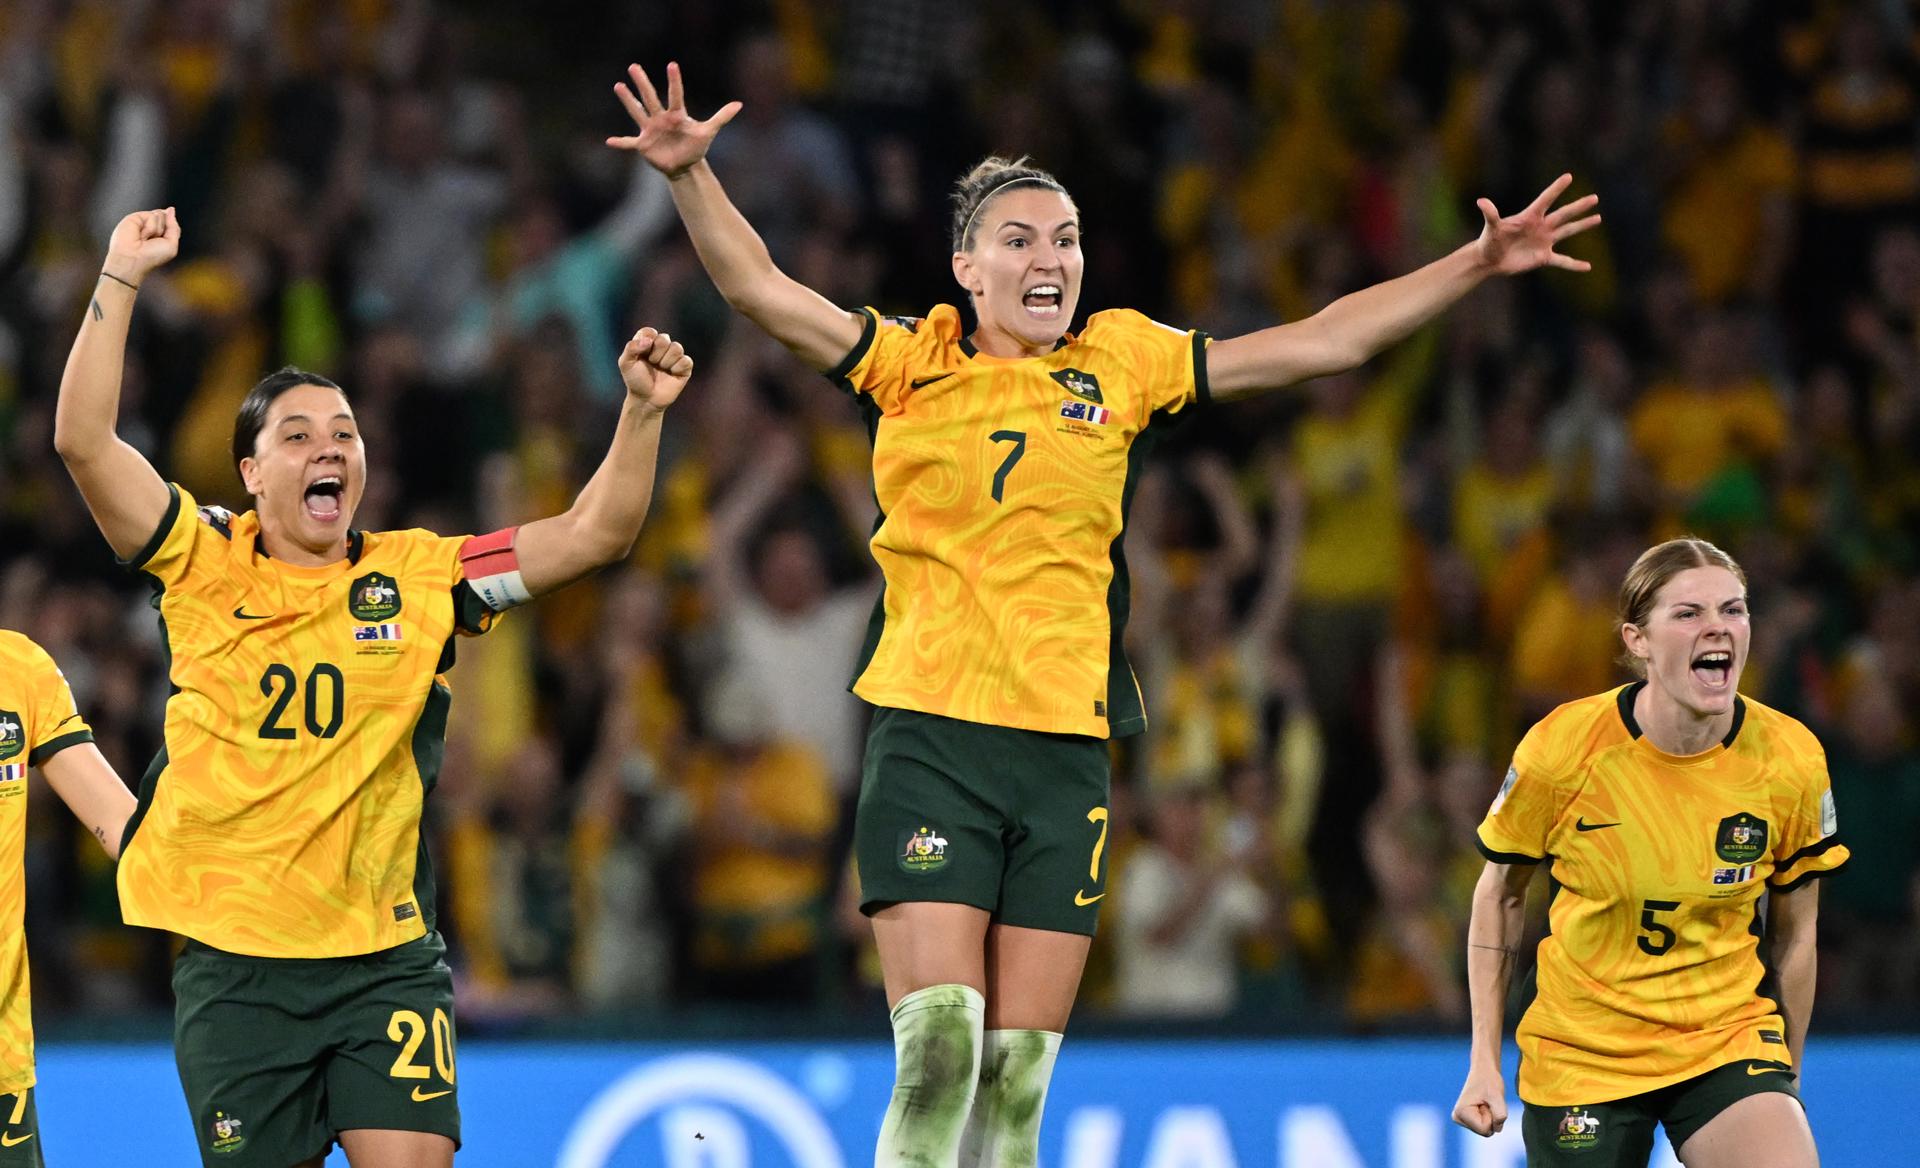 Sam Kerr (left), Steph Catley (center) and Cortnee Vine of Australia react after the Matildas defeated France in a penalty shoot-out in a FIFA Women's World Cup 2023 quarterfinal contest in Brisbane, Australia, on 12 August 2023. EFE/EPA/DARREN ENGLAND AUSTRALIA AND NEW ZEALAND OUT
